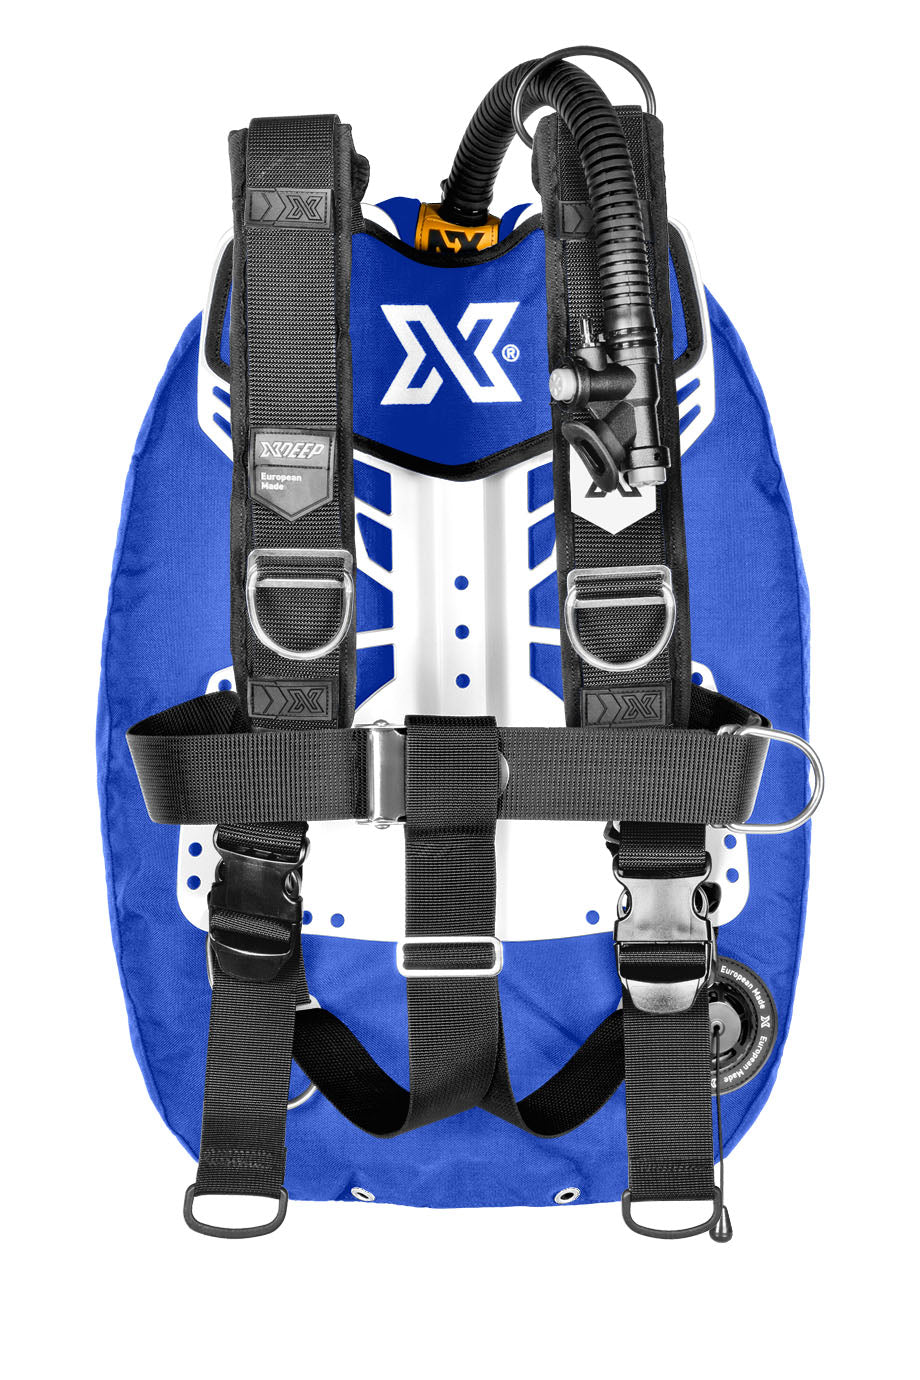 XDEEP XDEEP Zen Wing System Deluxe with Small / Blue / Alumminium - Oyster Diving